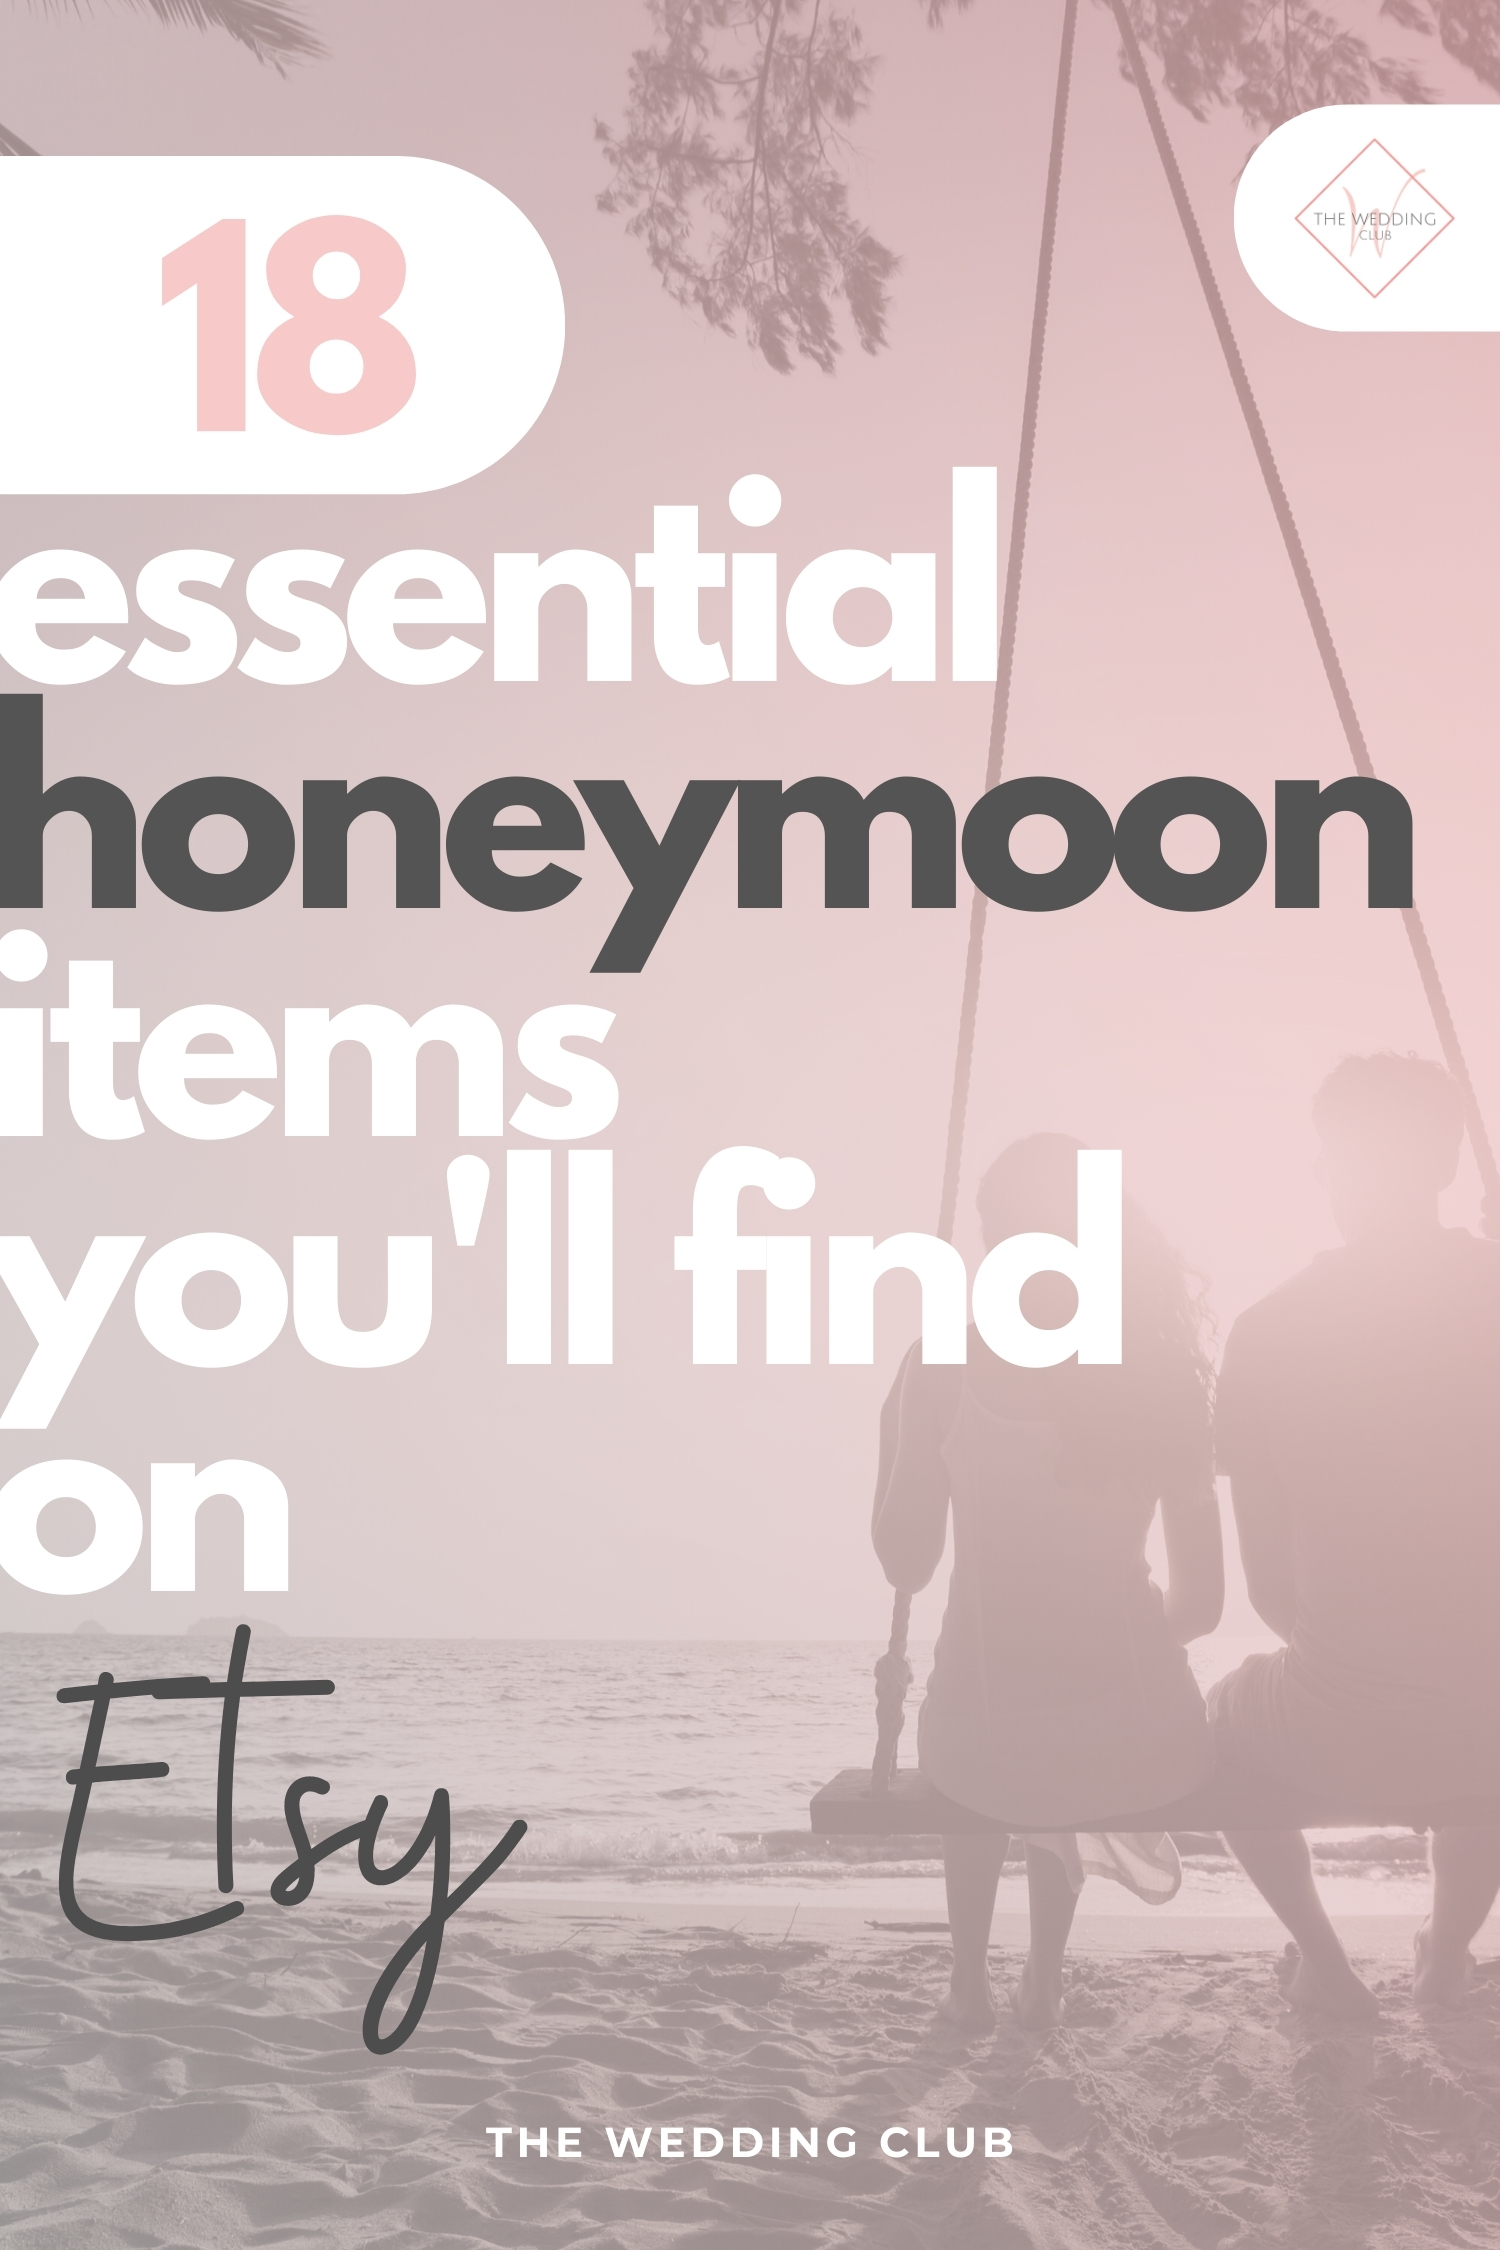 18 Essential Honeymoon Items from Etsy